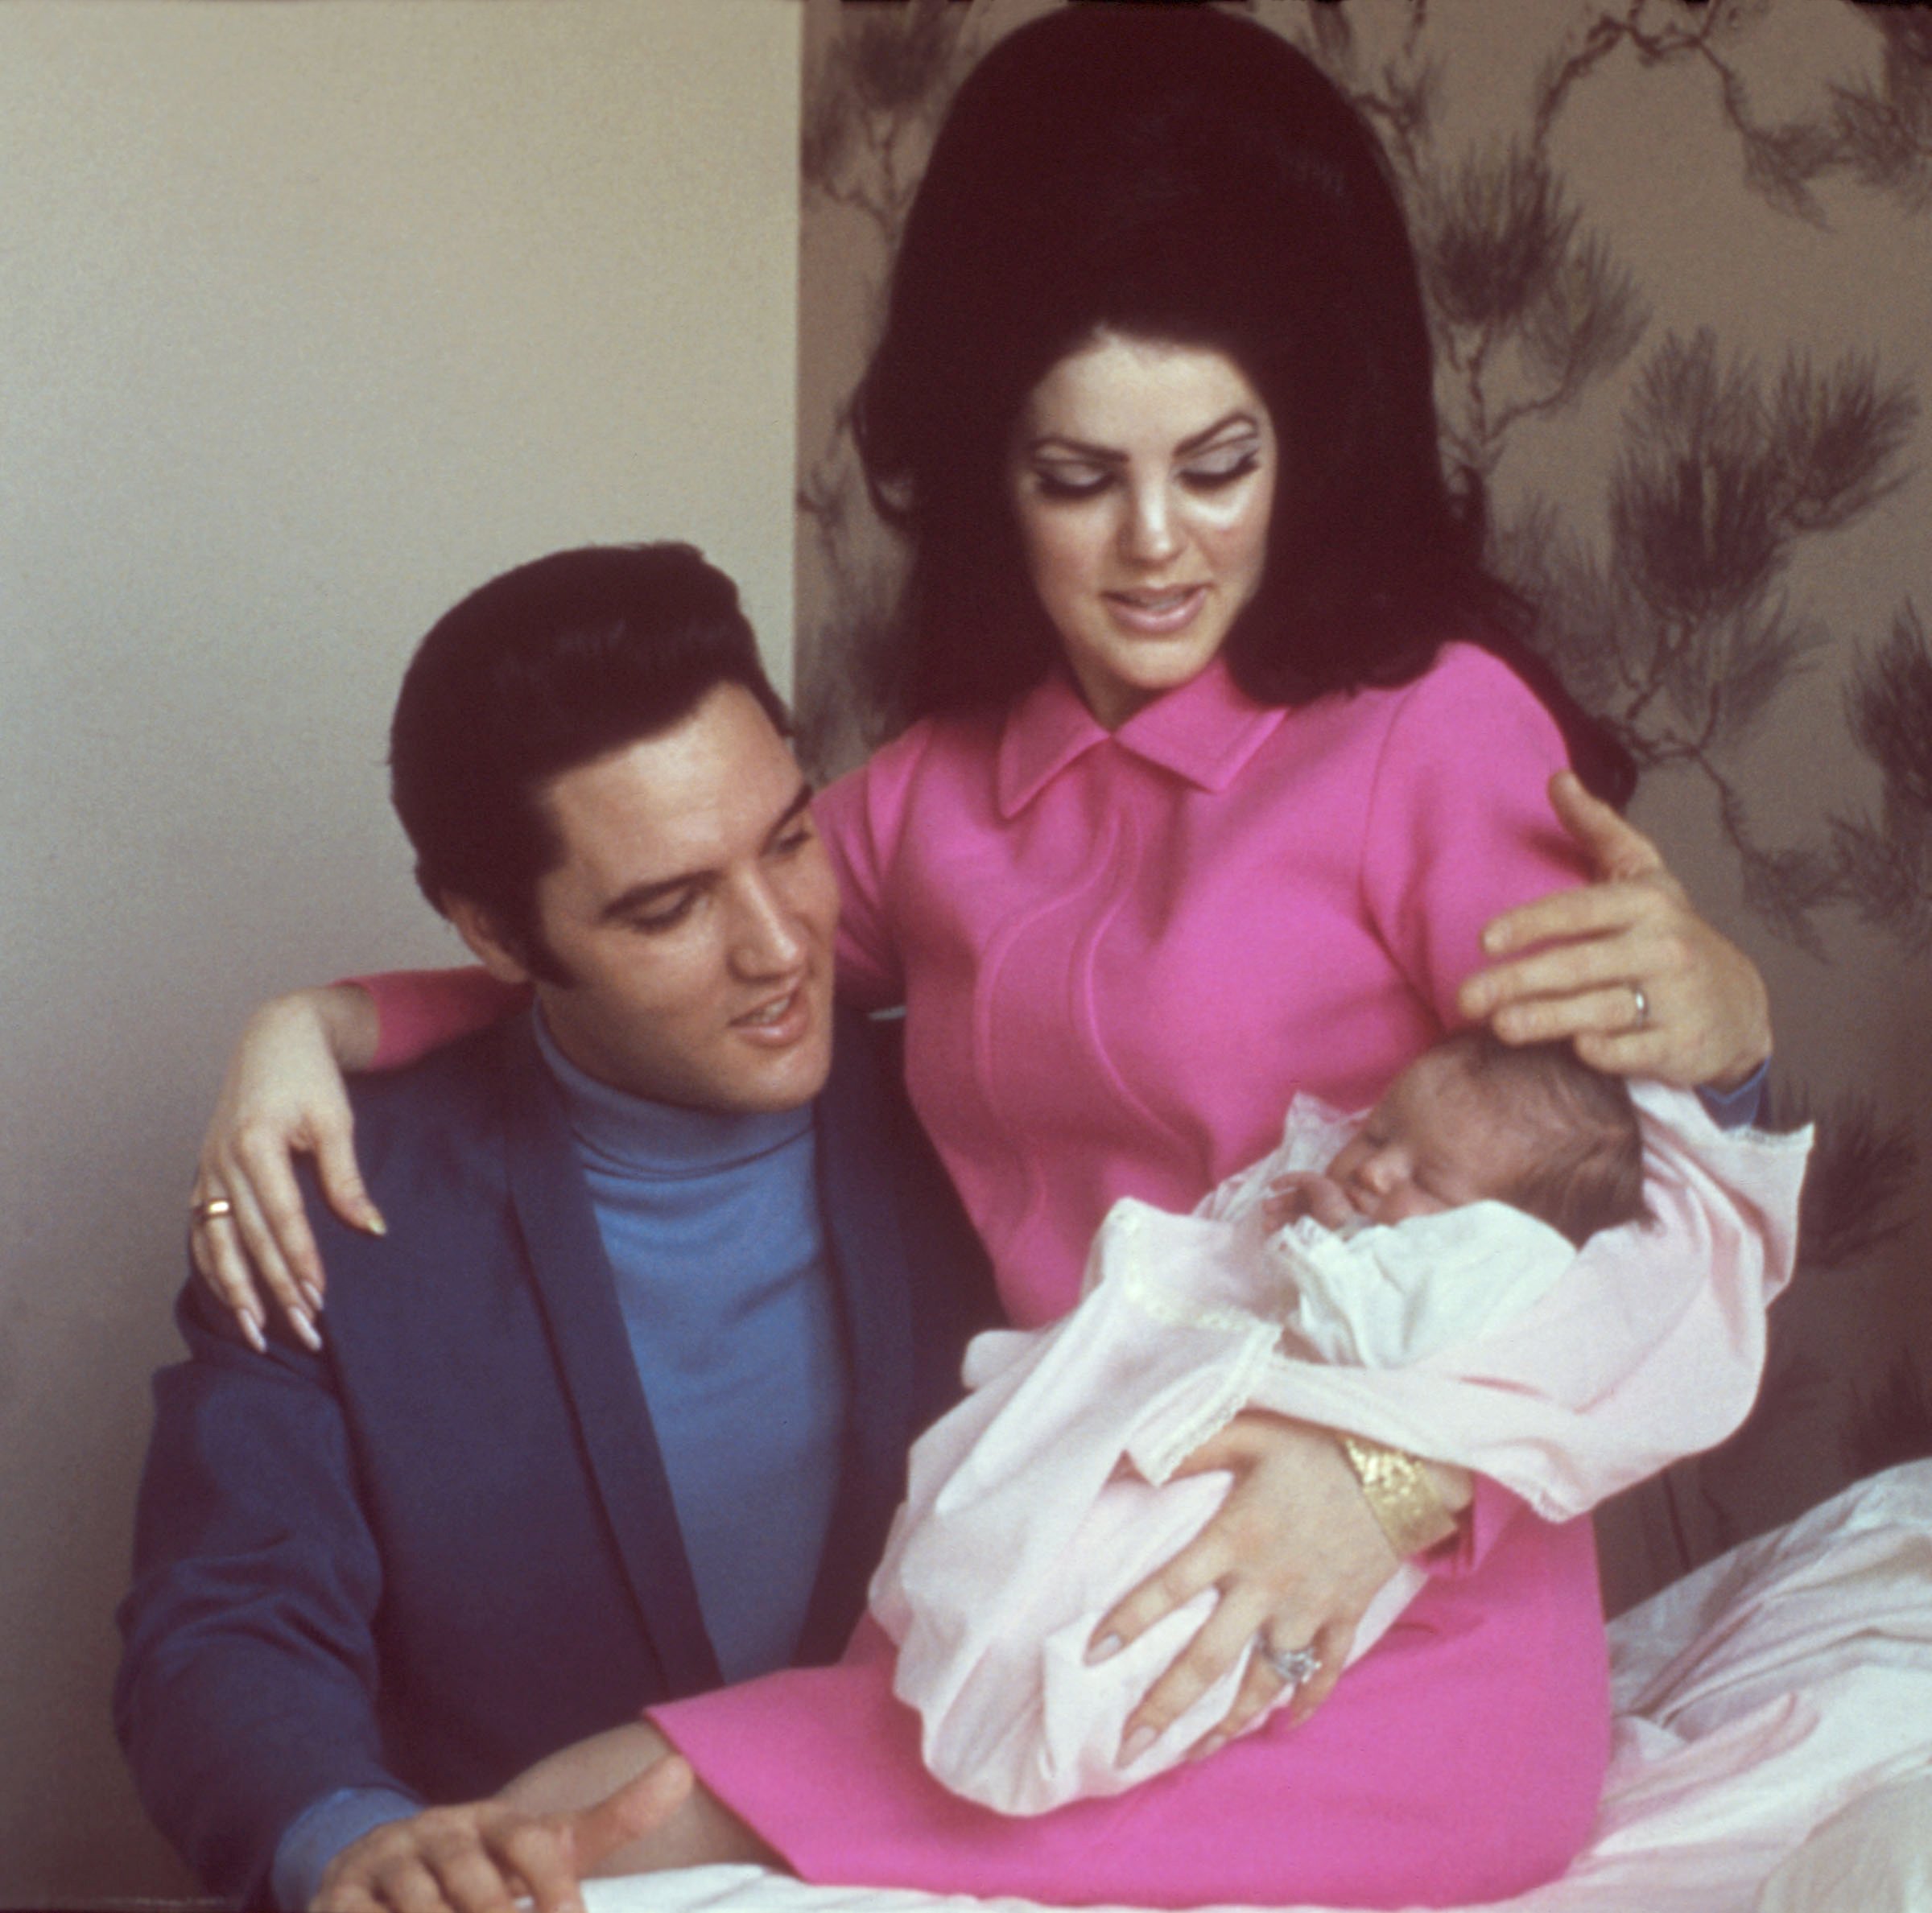 Elvis Presley with his wife Priscilla Beaulieu Presley and their daughter Lisa Marie Presley, 4 days old, on February 5, 1968, in Memphis, Tennessee | Source: Getty Images